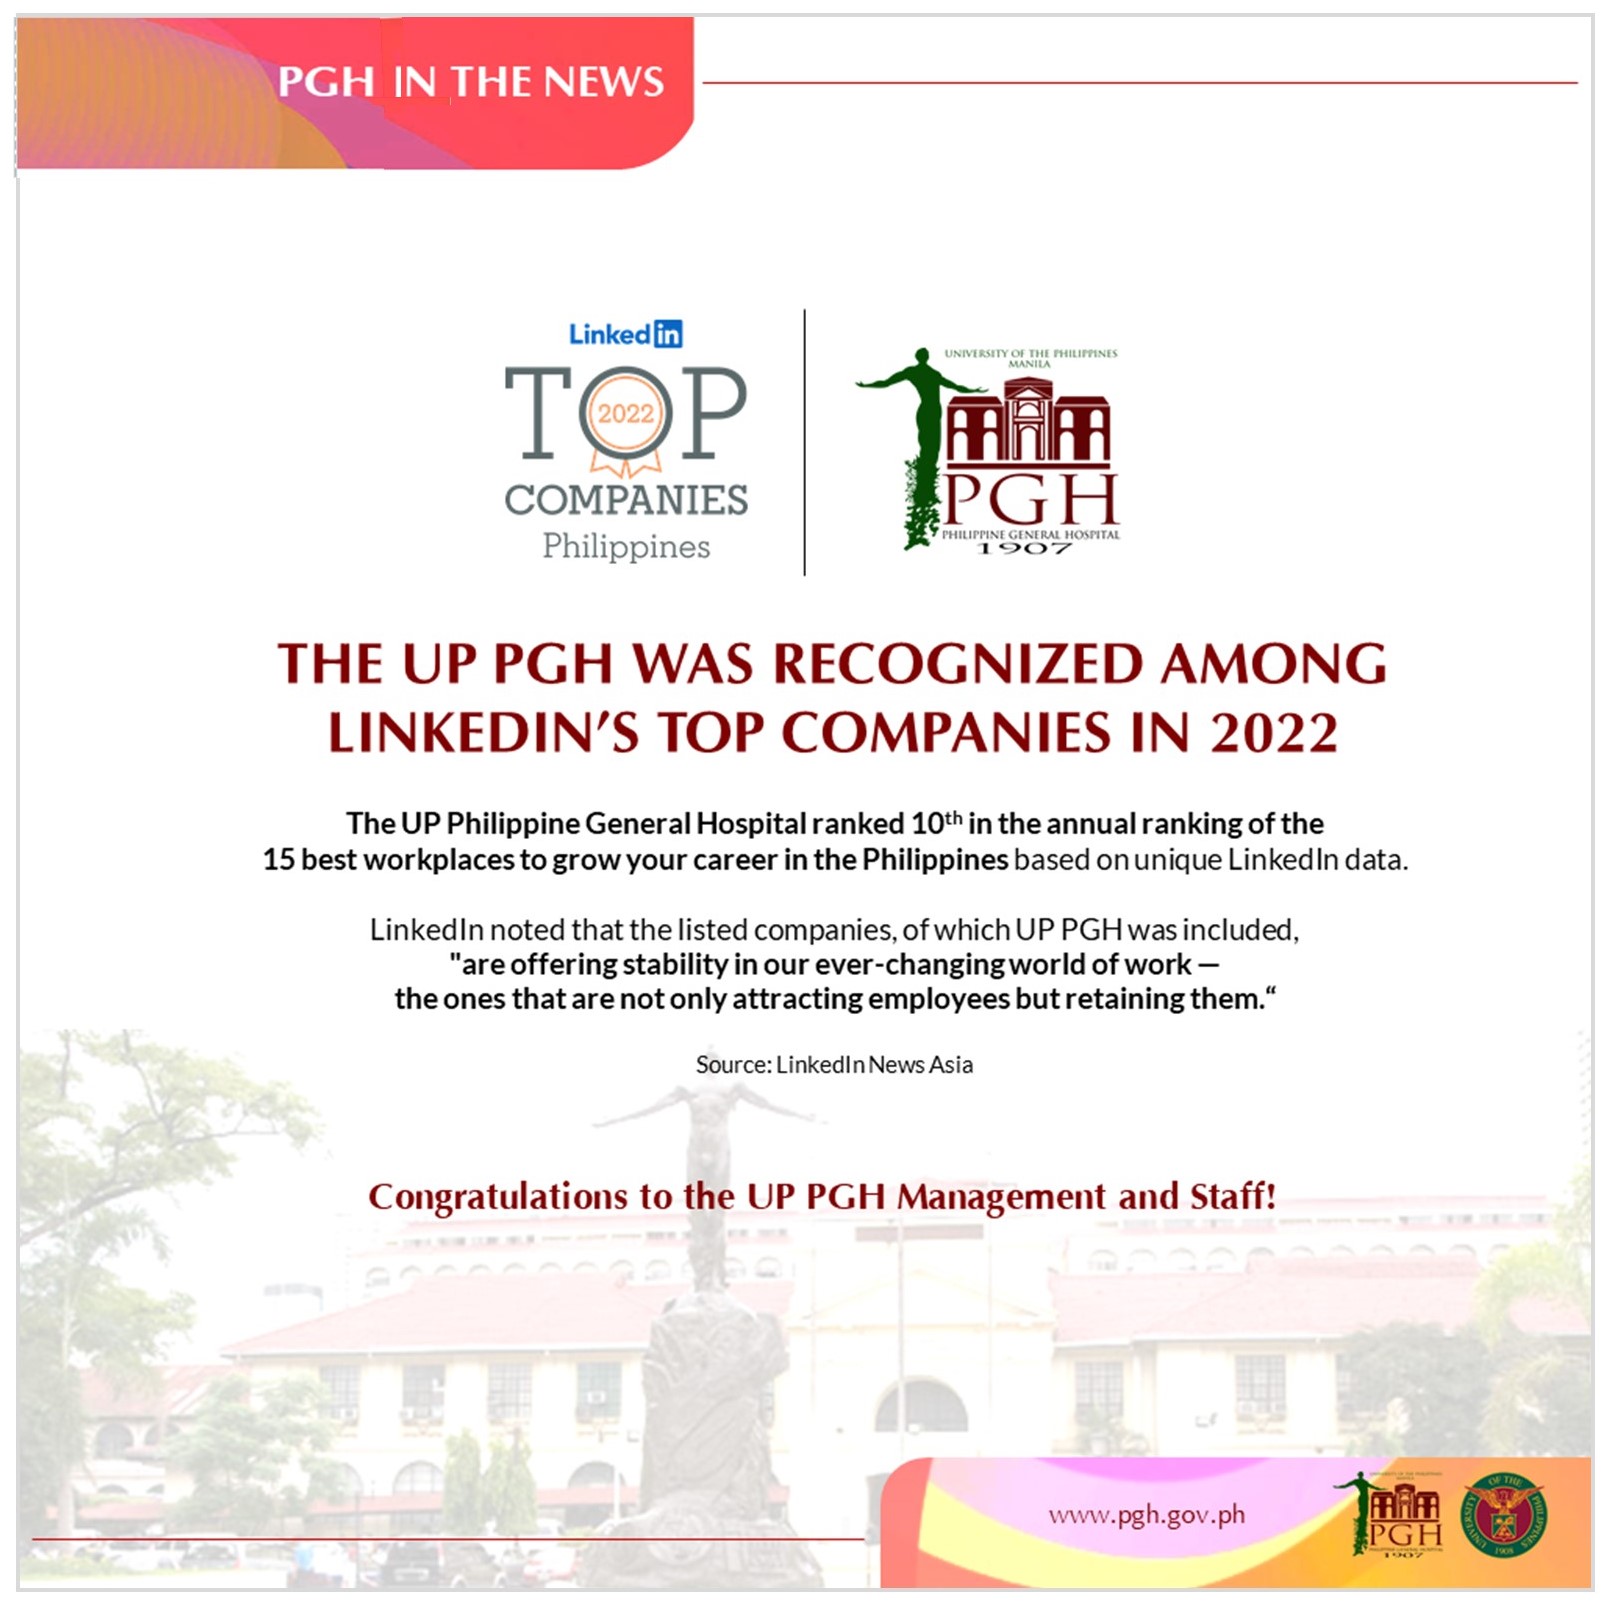 UP PGH is one of the LinkedIn’s Top Companies in the Philippines for